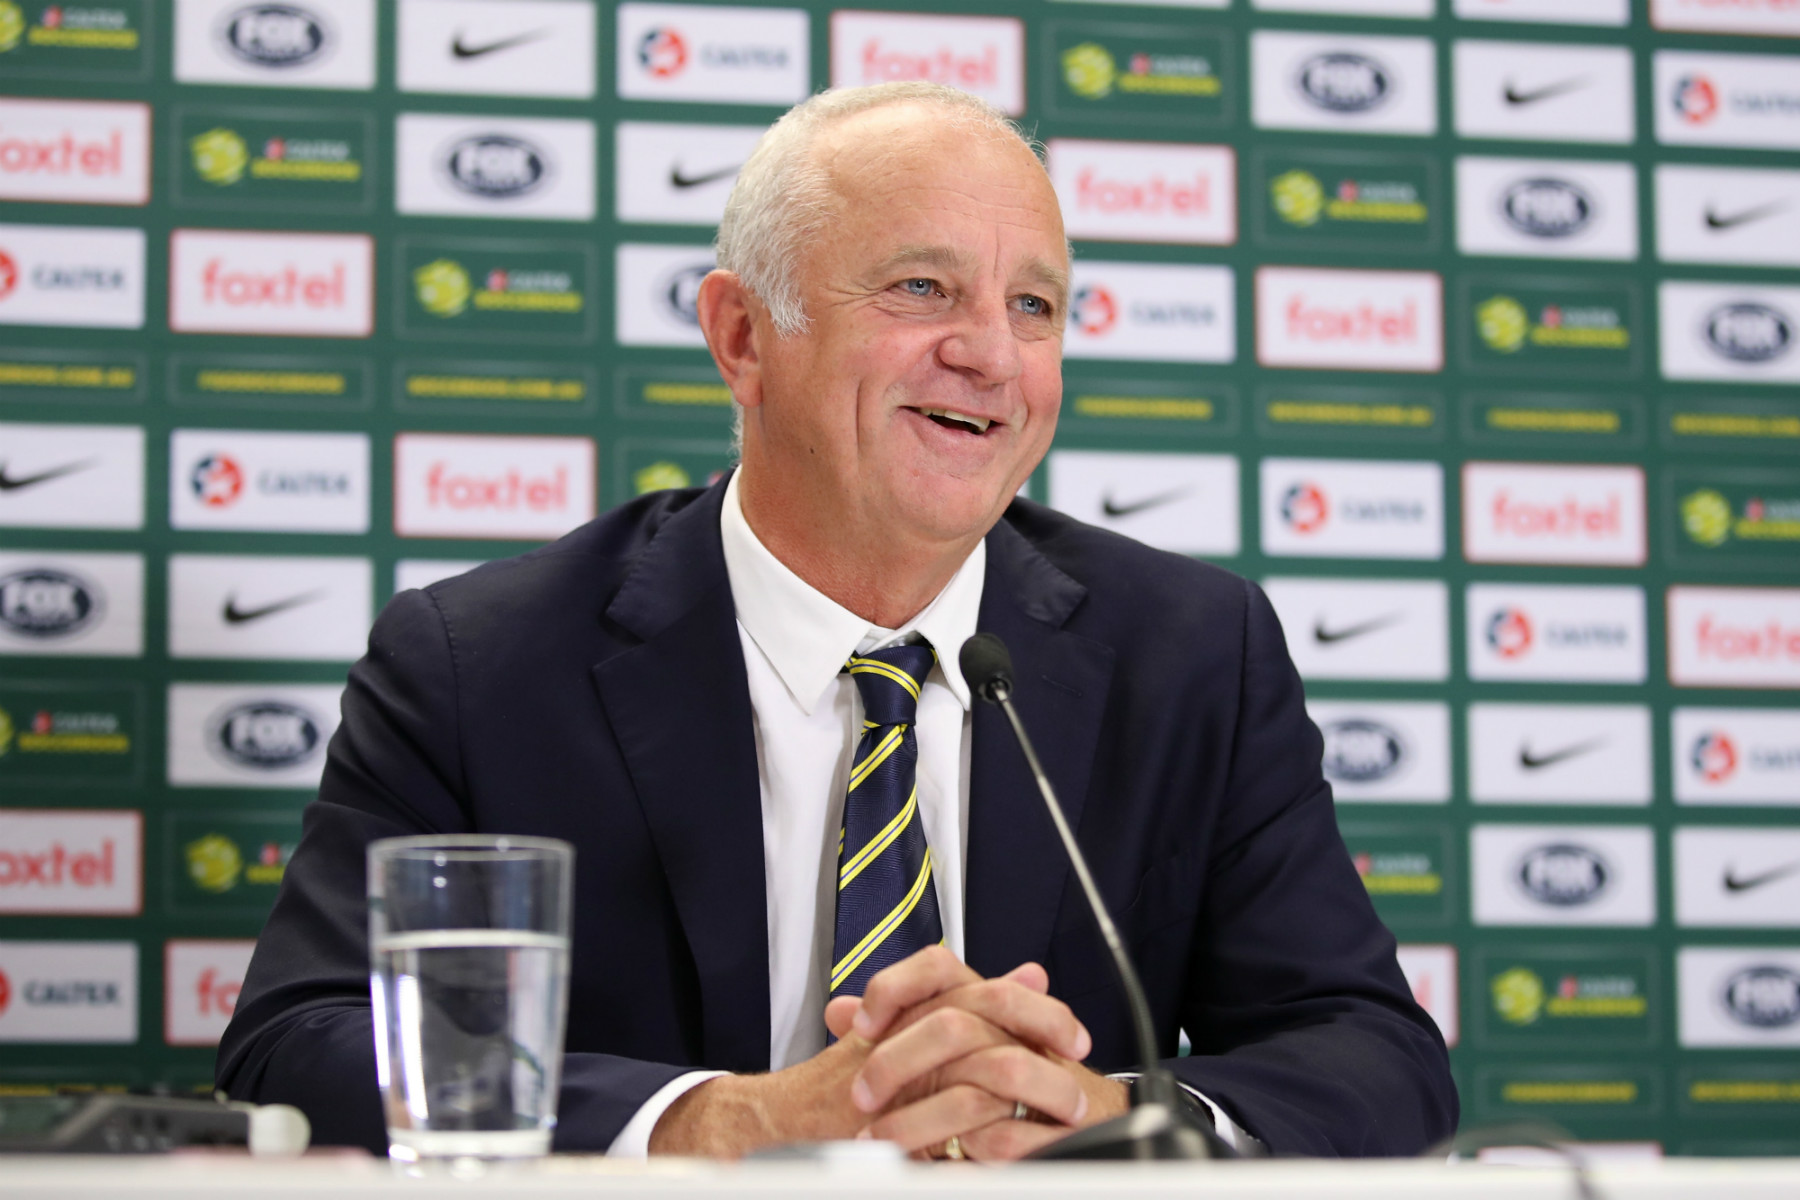 New Caltex Socceroos Head Coach Graham Arnold gives his first press conference